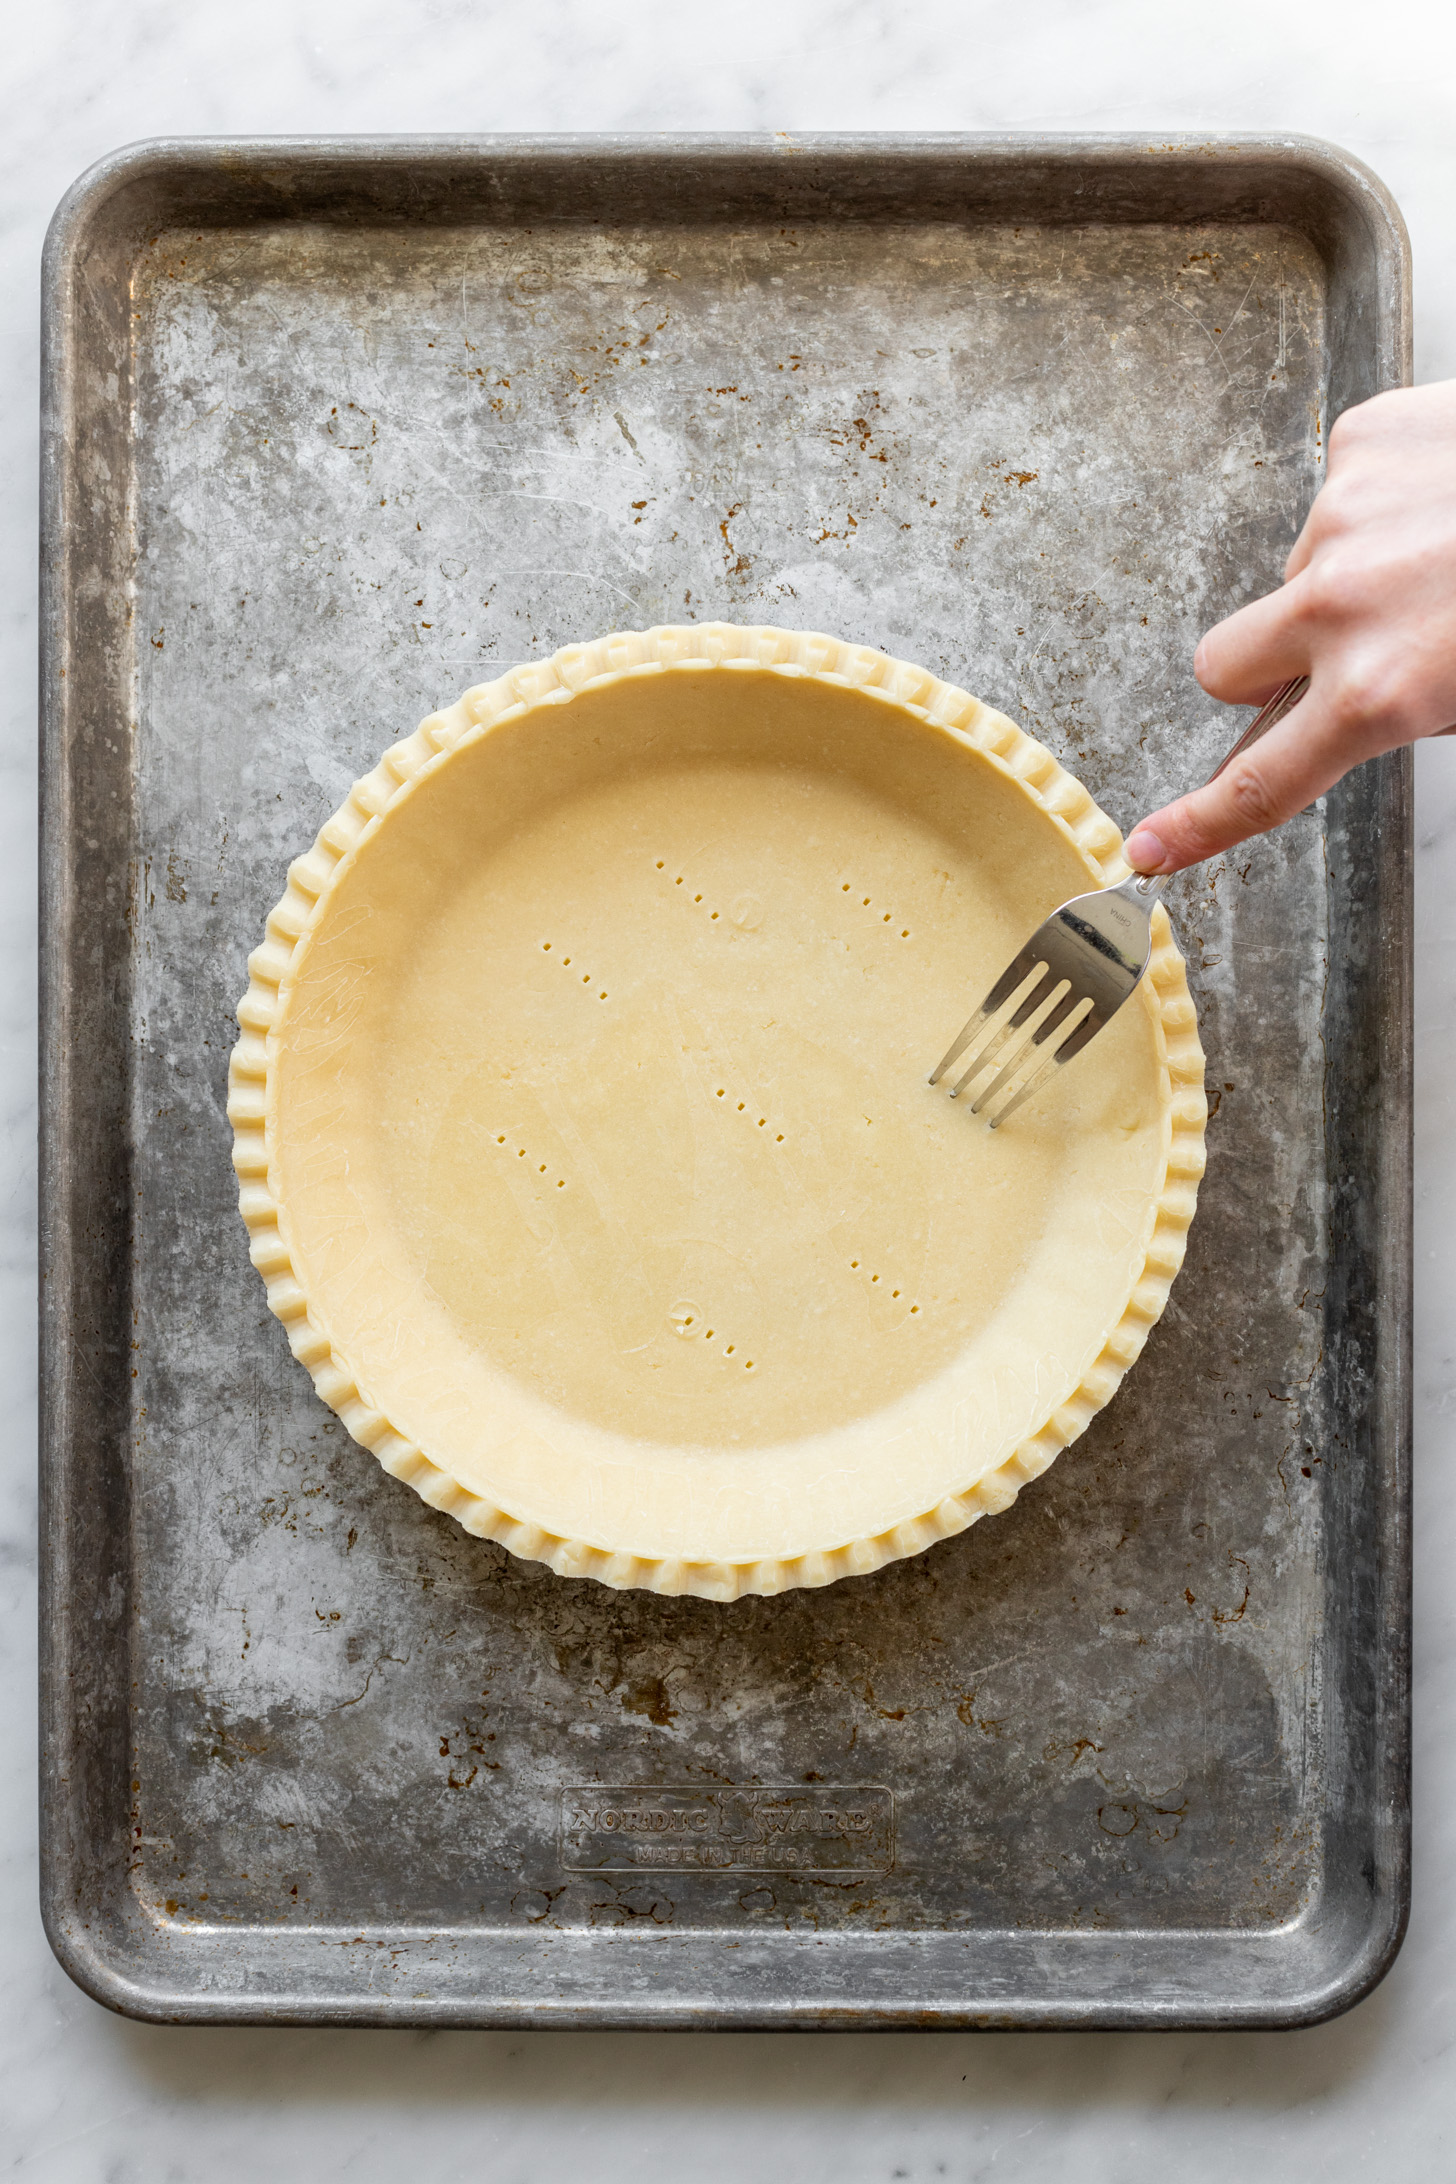 A hand holding a fork pressing tines of the fork into an unbaked pie crust in a pie pan sitting on a sheet pan.